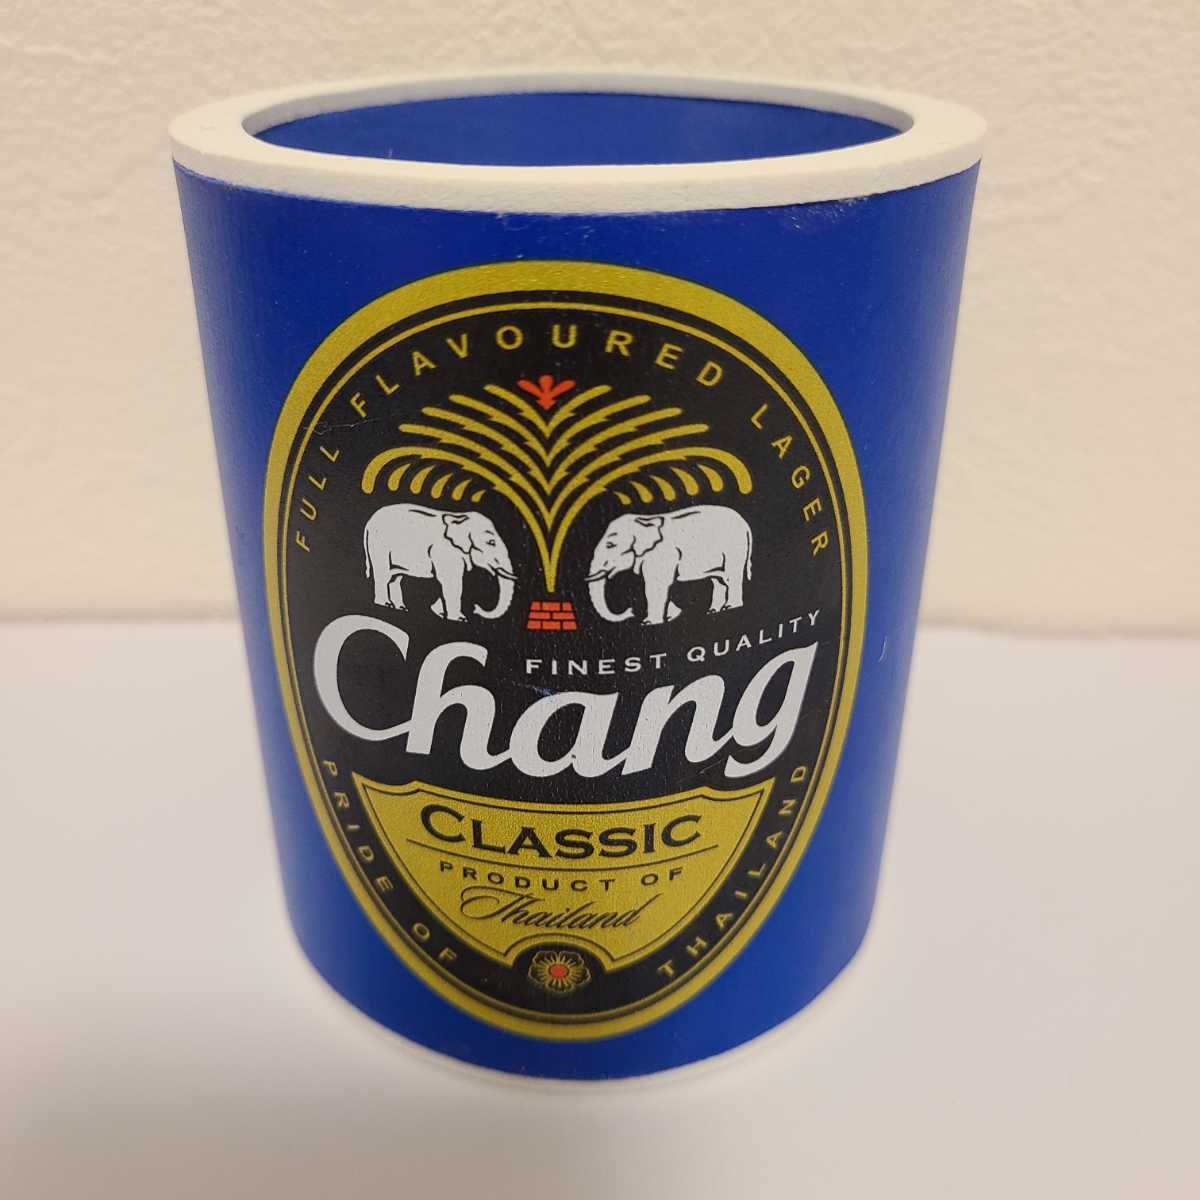 * postage 200 jpy * keep cool * can holder drink holder * tea -n beer Chang Beer* can for Thai miscellaneous goods cooler,air conditioner Thailand* other color, other beer for . equipped 